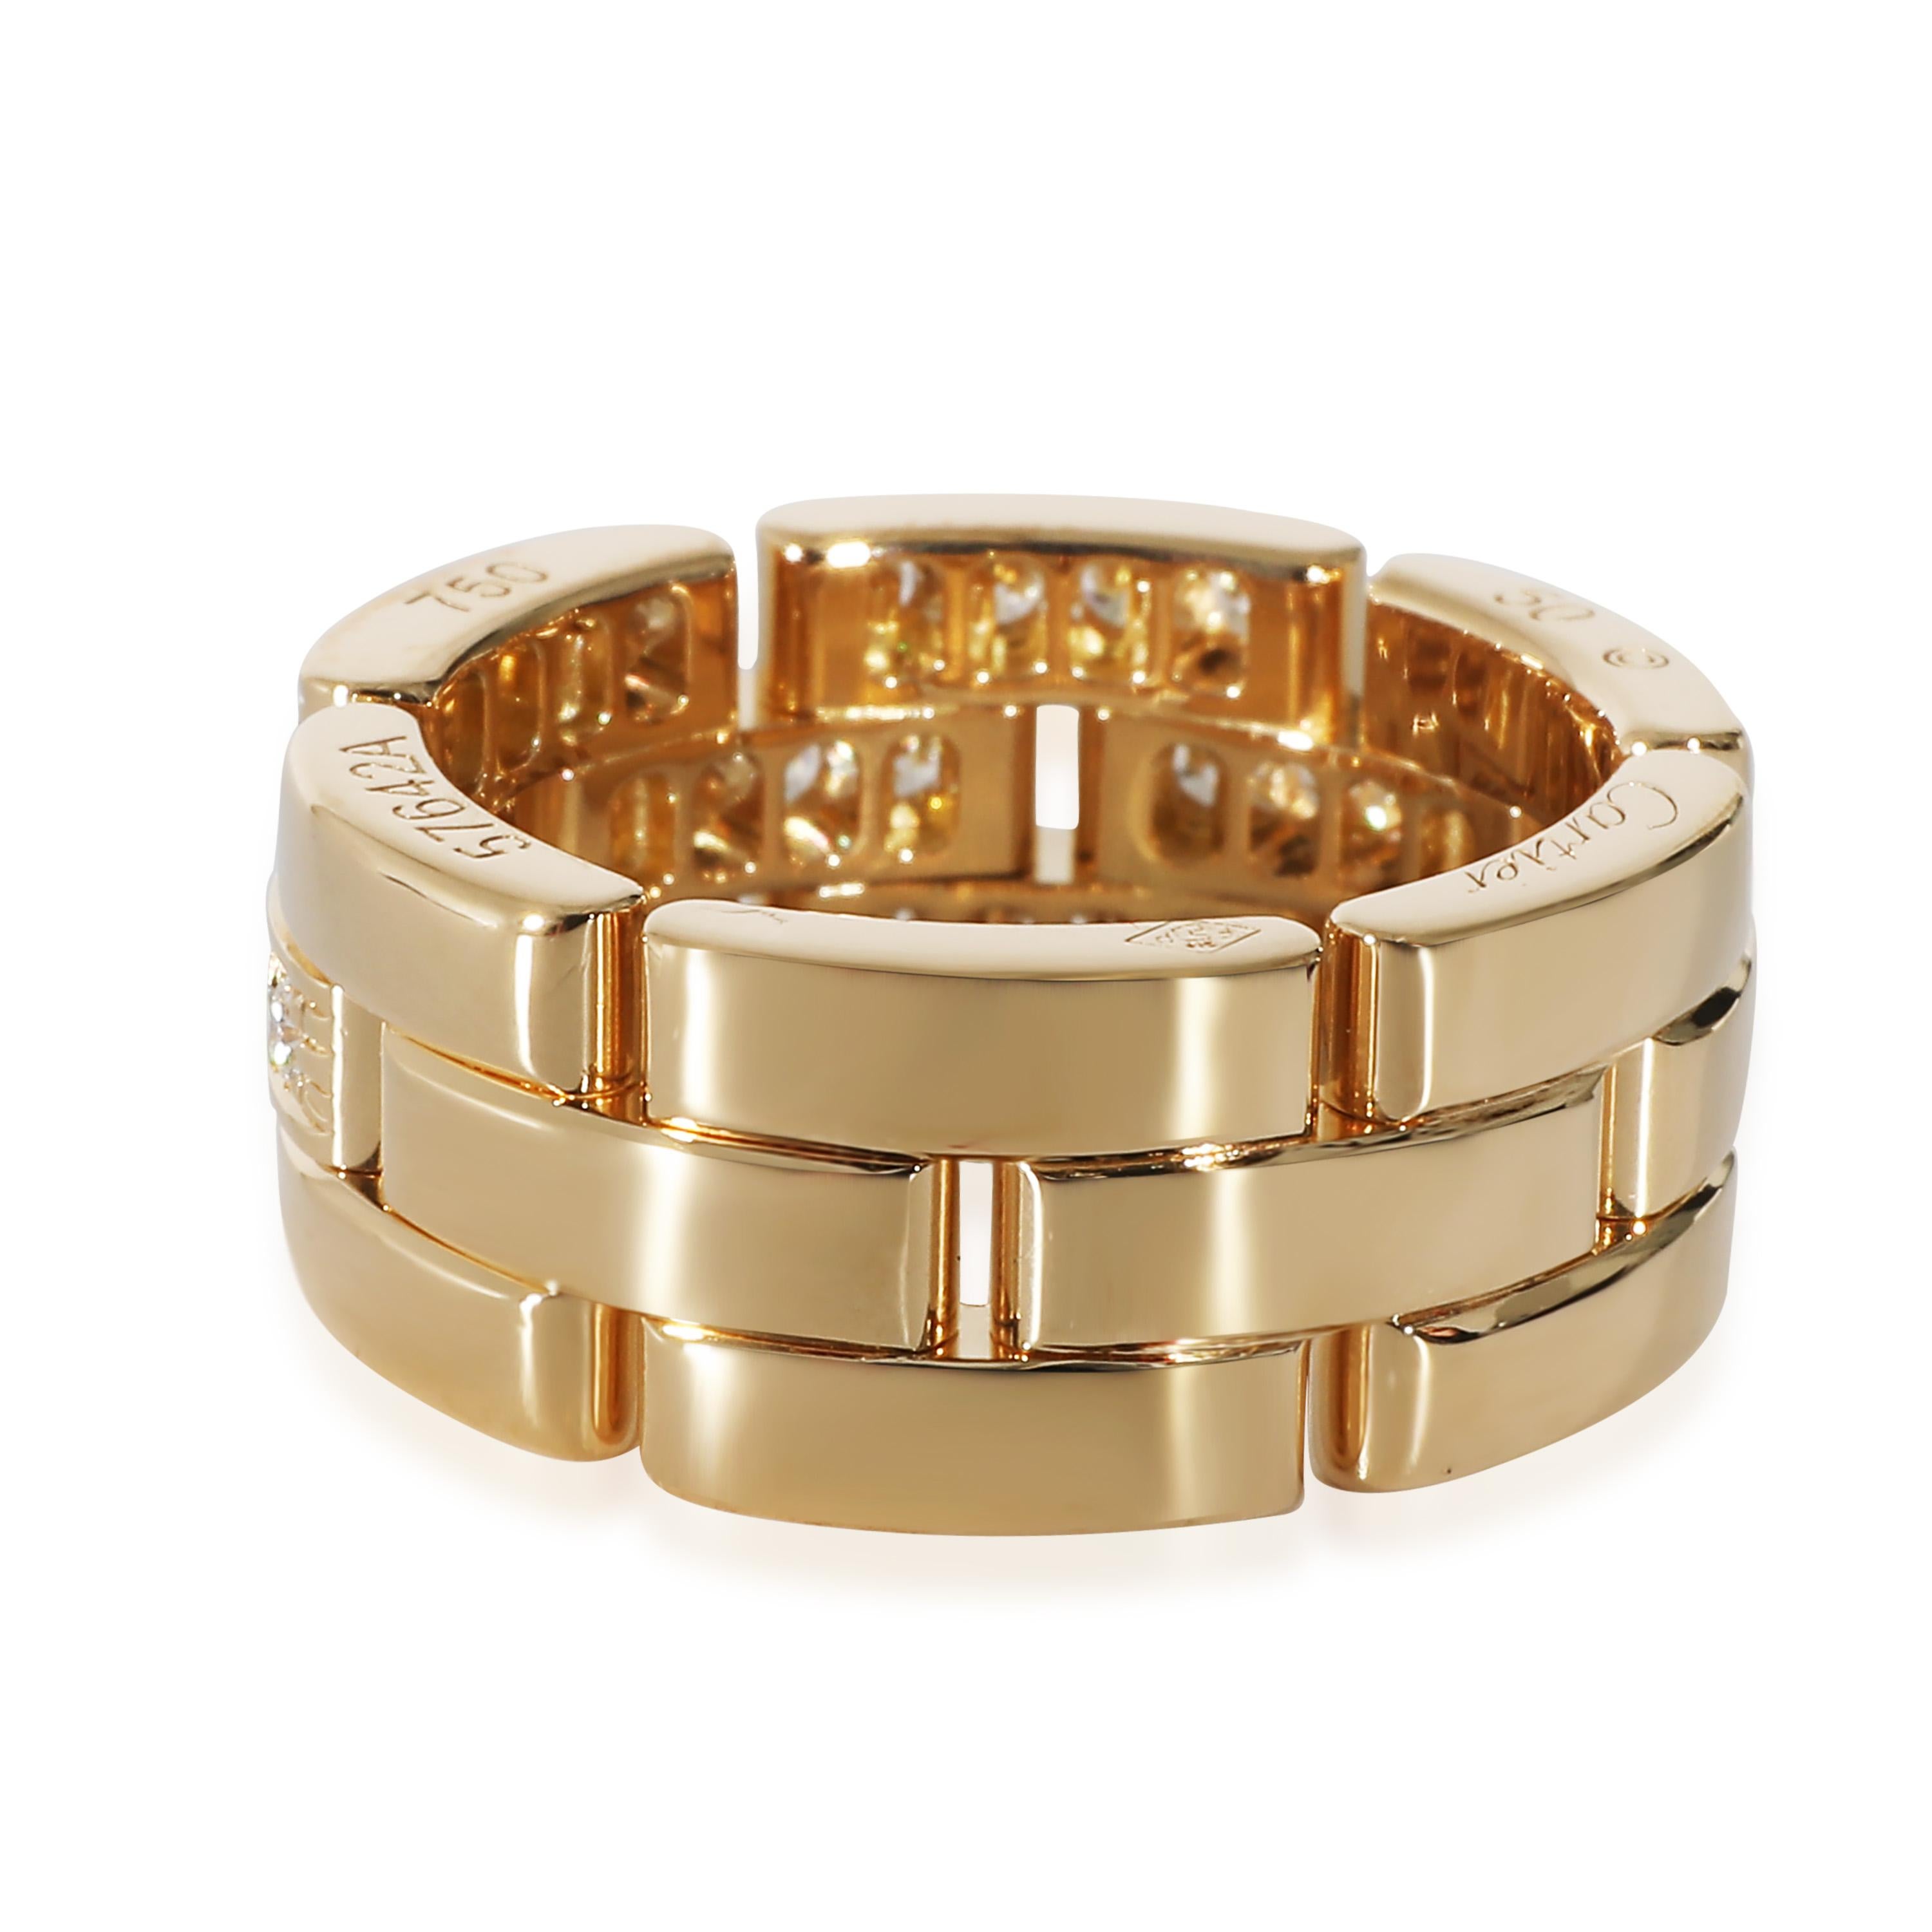 Cartier Maillon Panthere Band in 18k Yellow Gold 0.53 CTW

PRIMARY DETAILS
SKU: 135642
Listing Title: Cartier Maillon Panthere Band in 18k Yellow Gold 0.53 CTW
Condition Description: The Panthère de Cartier collection pays tribute to the natural